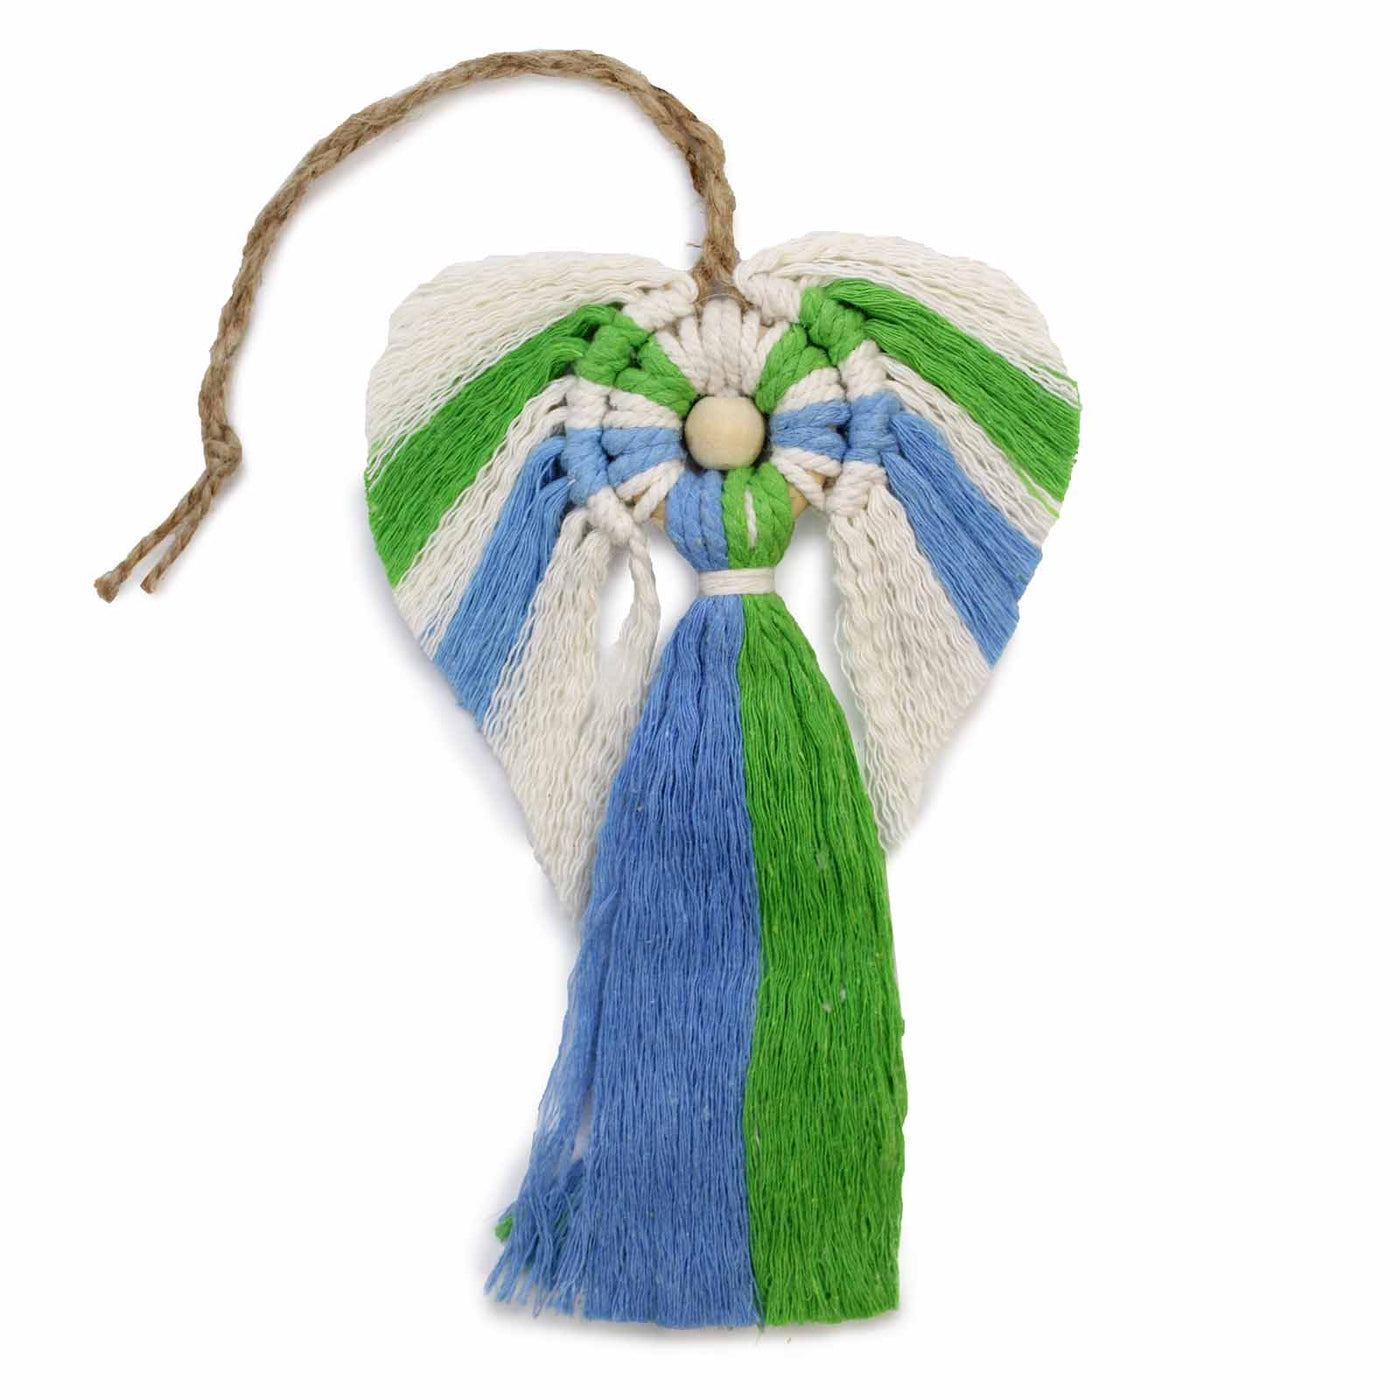 Hanging Blue And Green Cotton Macramé Angel in Gift Box - Earth.